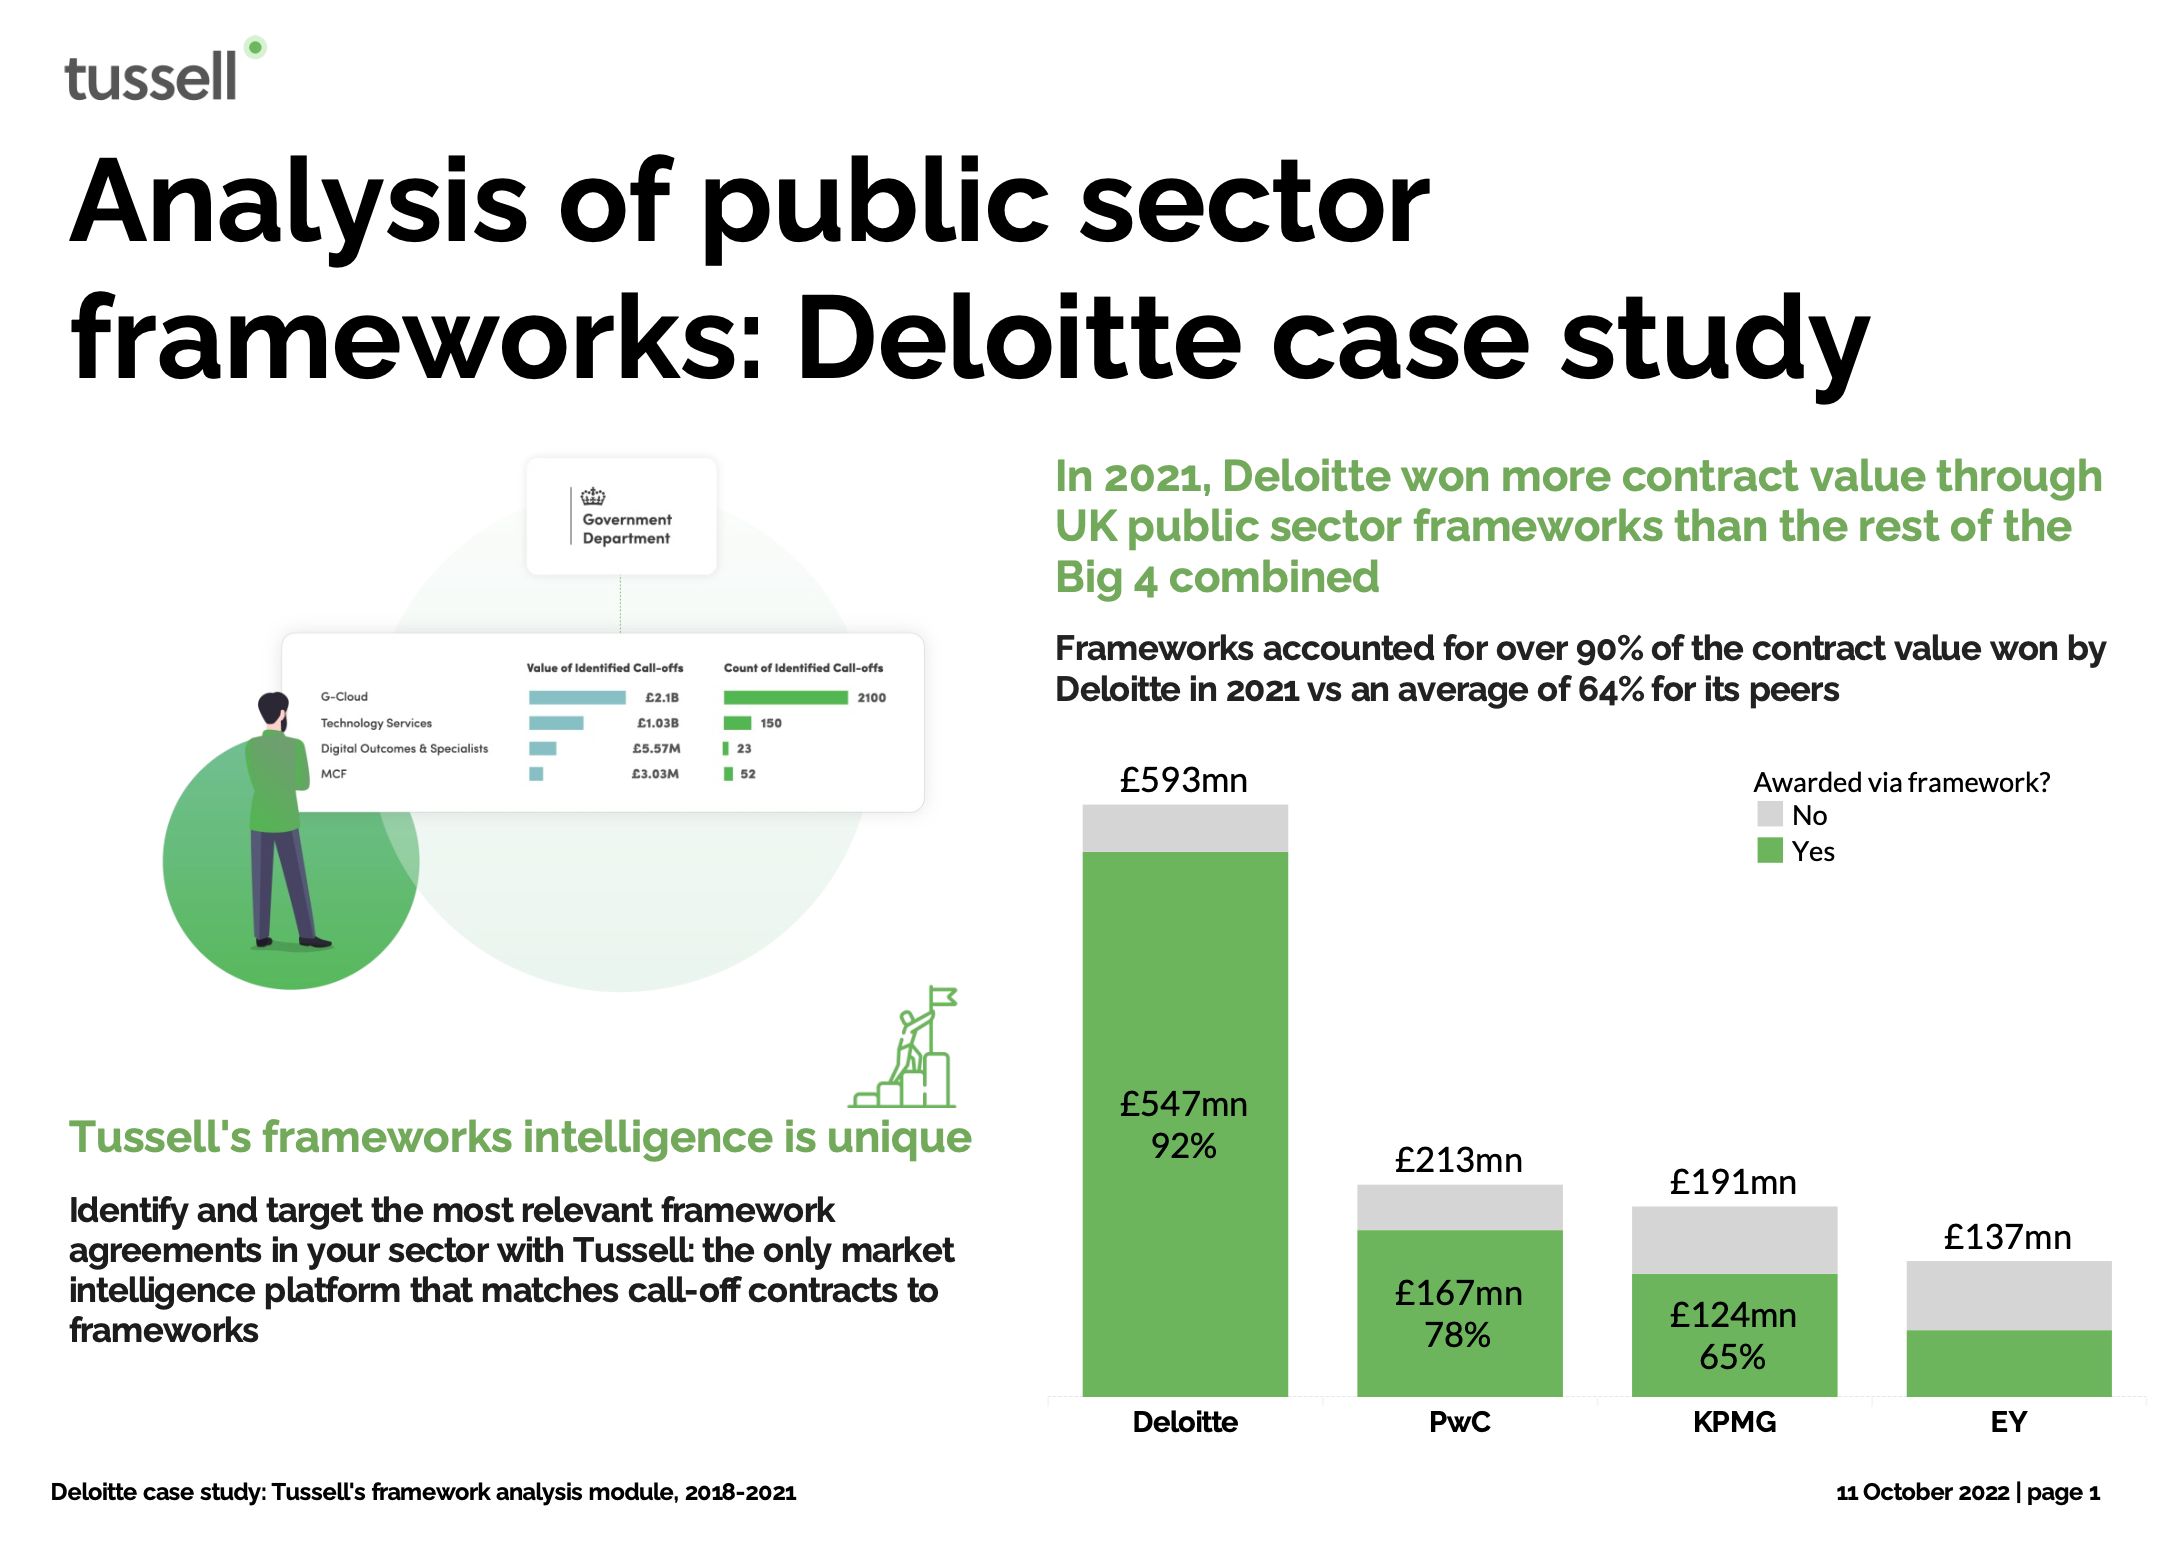 deloitte consulting case study example